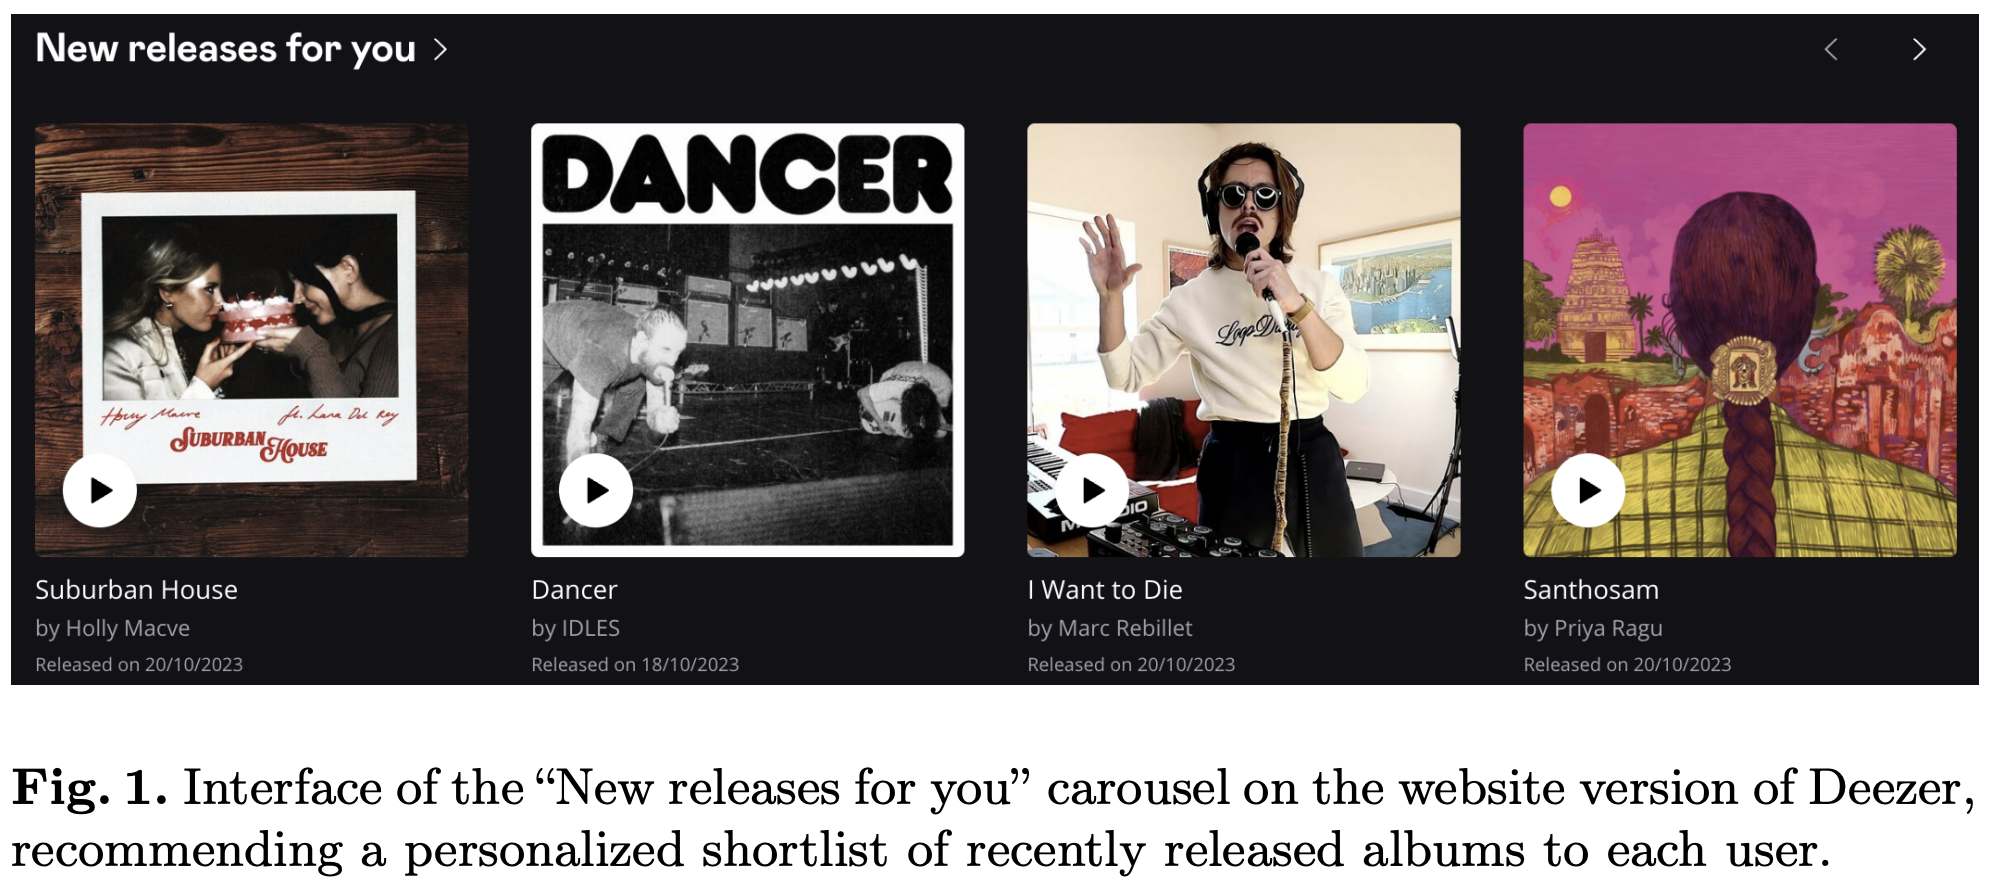 Let’s Get It Started: Fostering the Discoverability of New Releases on Deezer